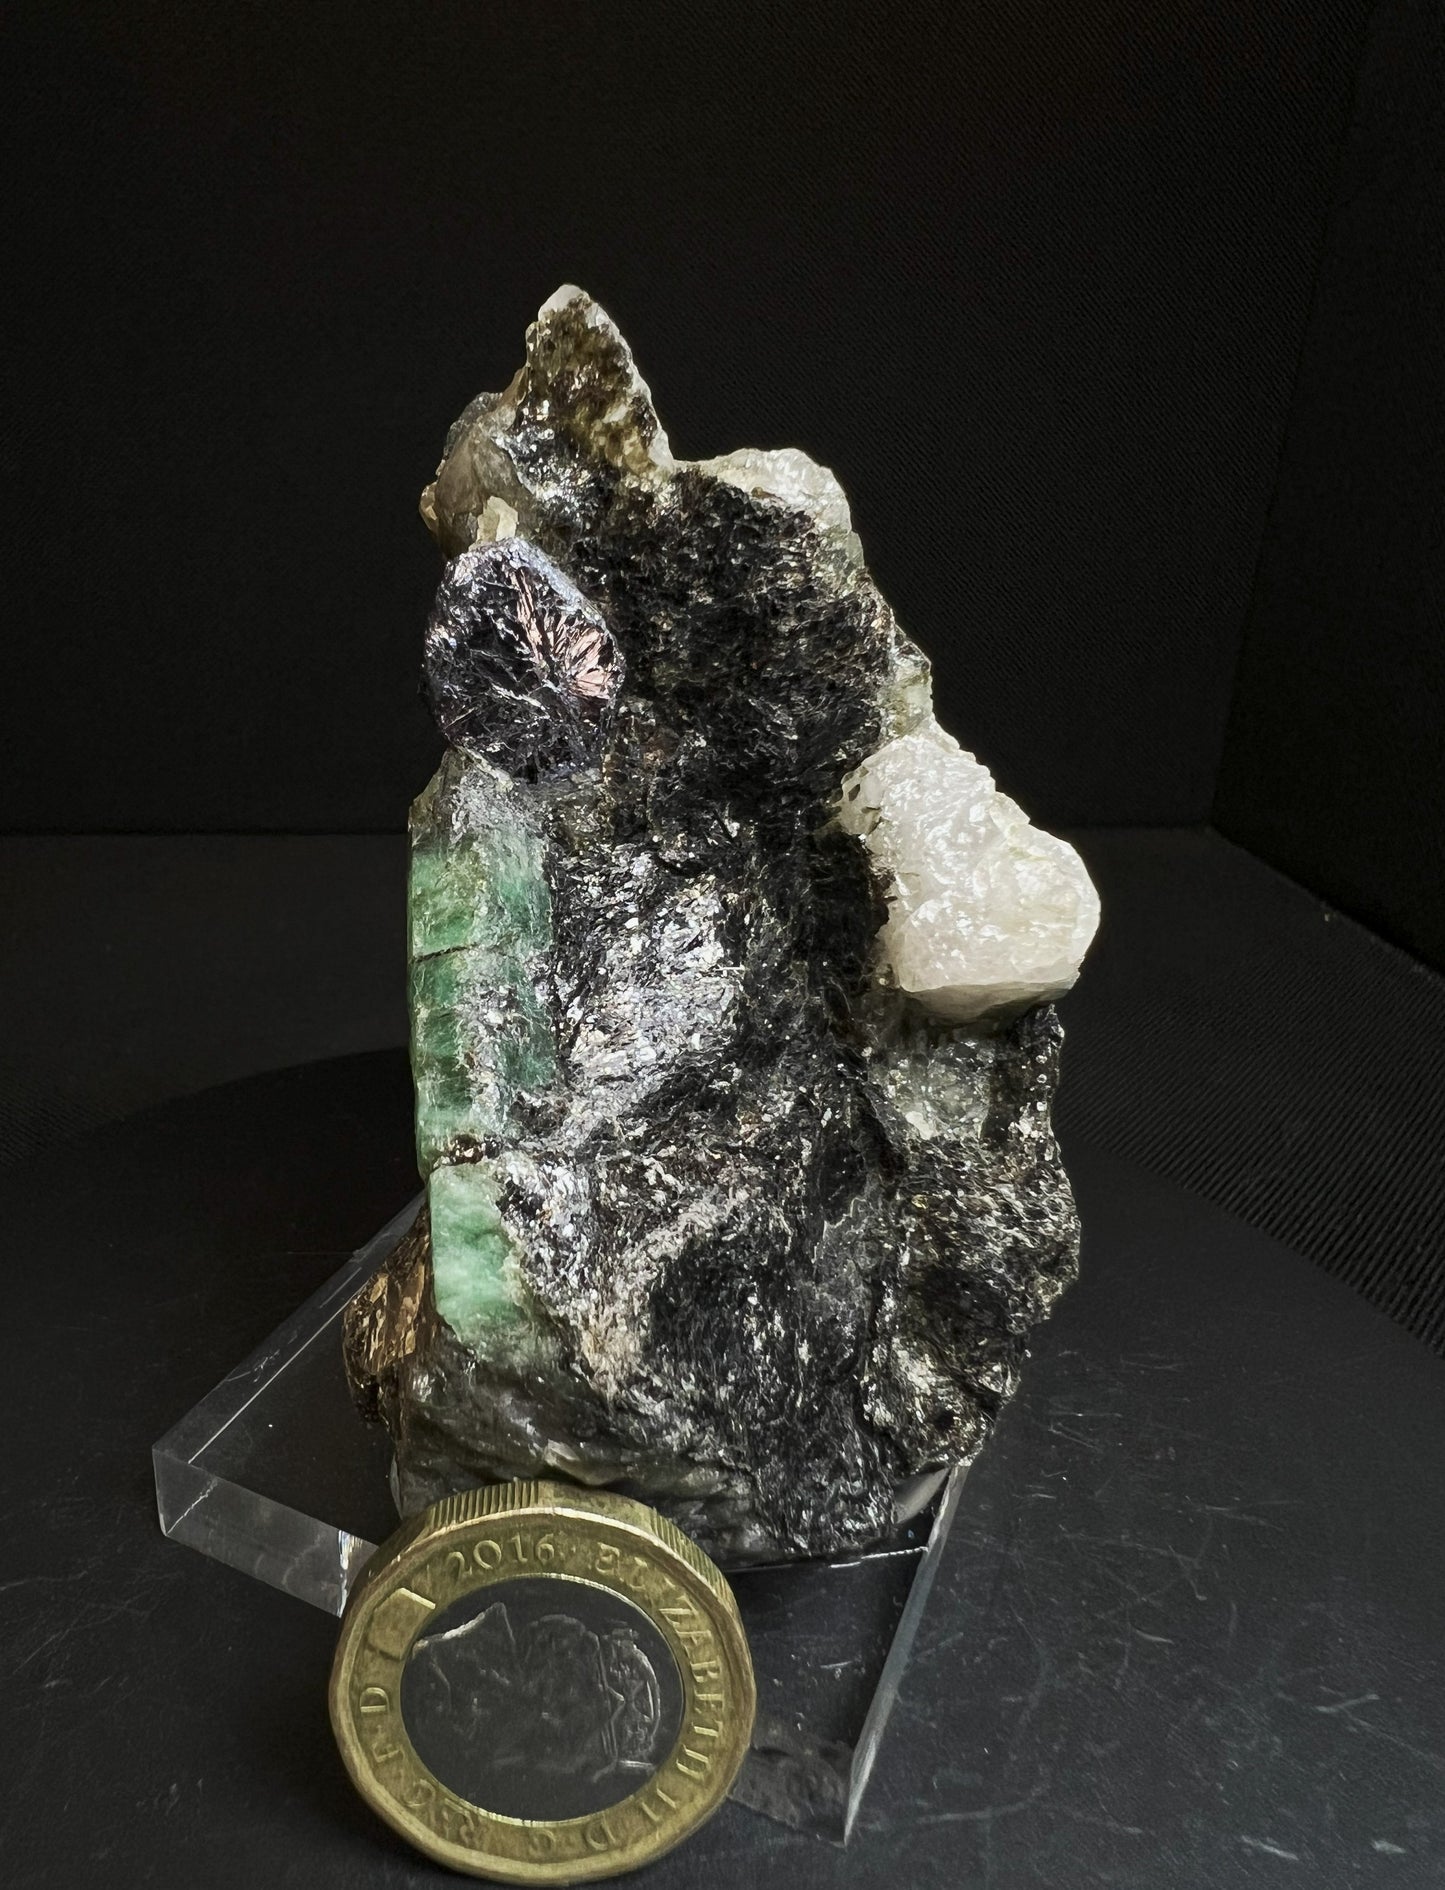 Rare Perfect Formation of Beryl Var Emerald With A Perfect Molybdenite Formation on Matrix From Carnaíba mining district, Pindobaçu, Bahia, Brazil